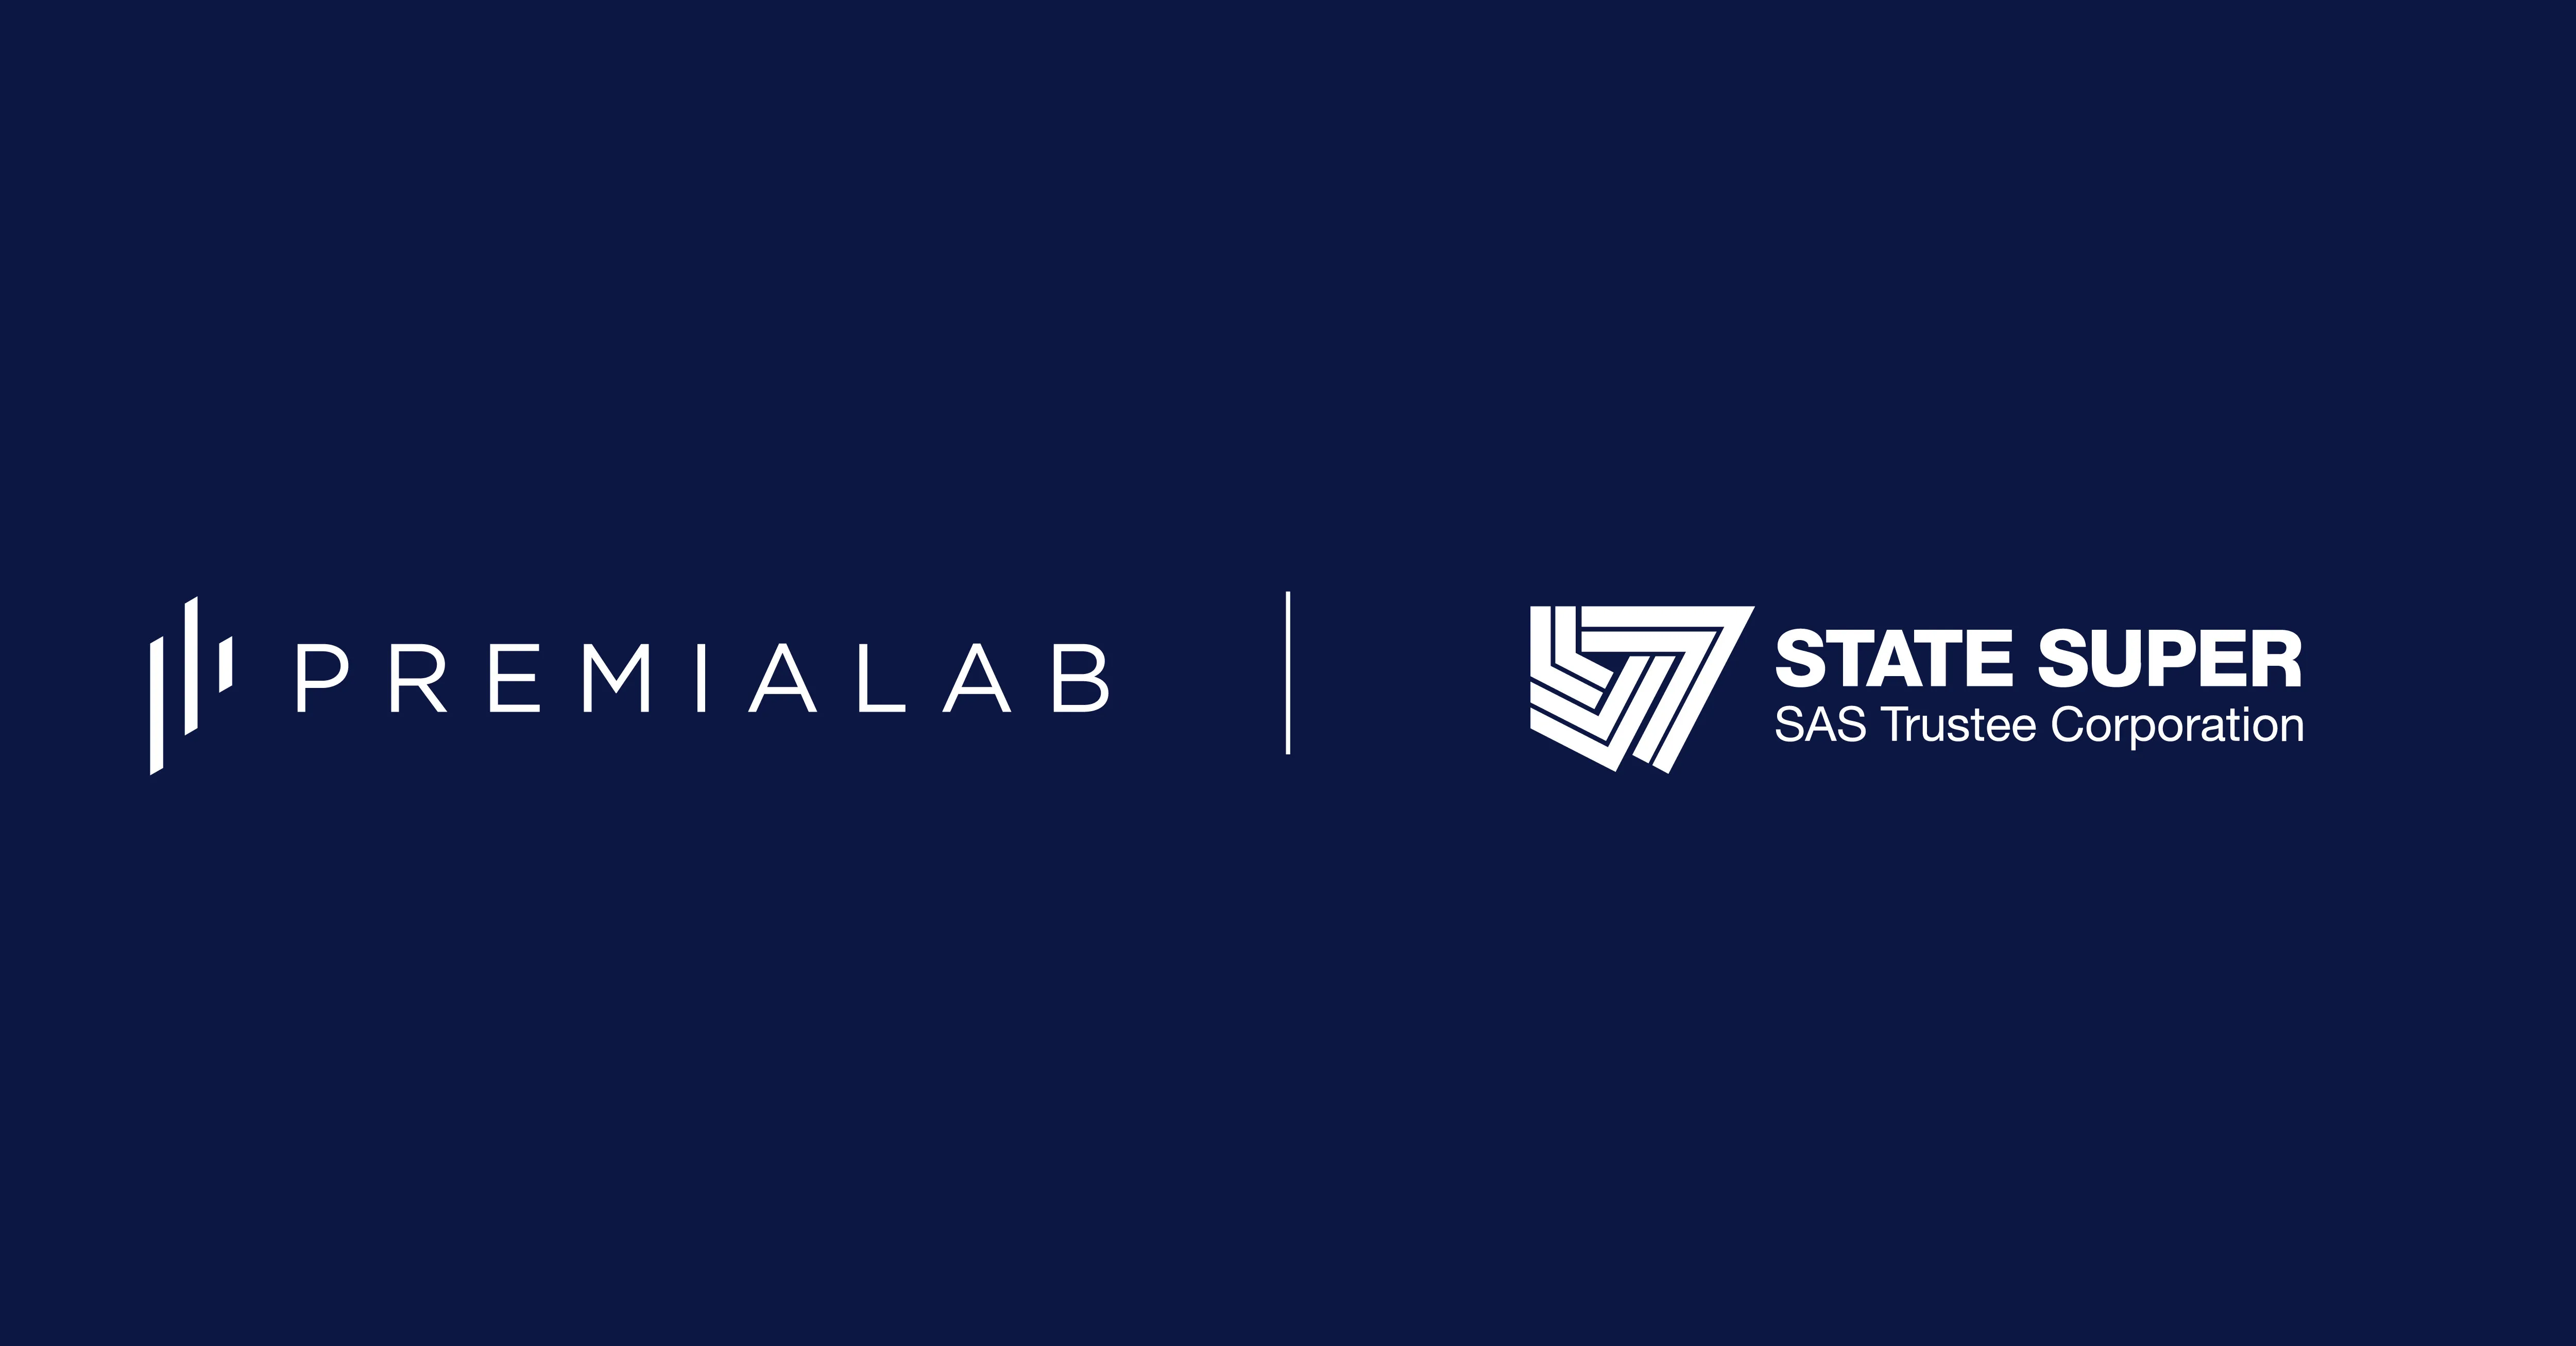 State Super (SAS Trustee Corporation) partners with Premialab